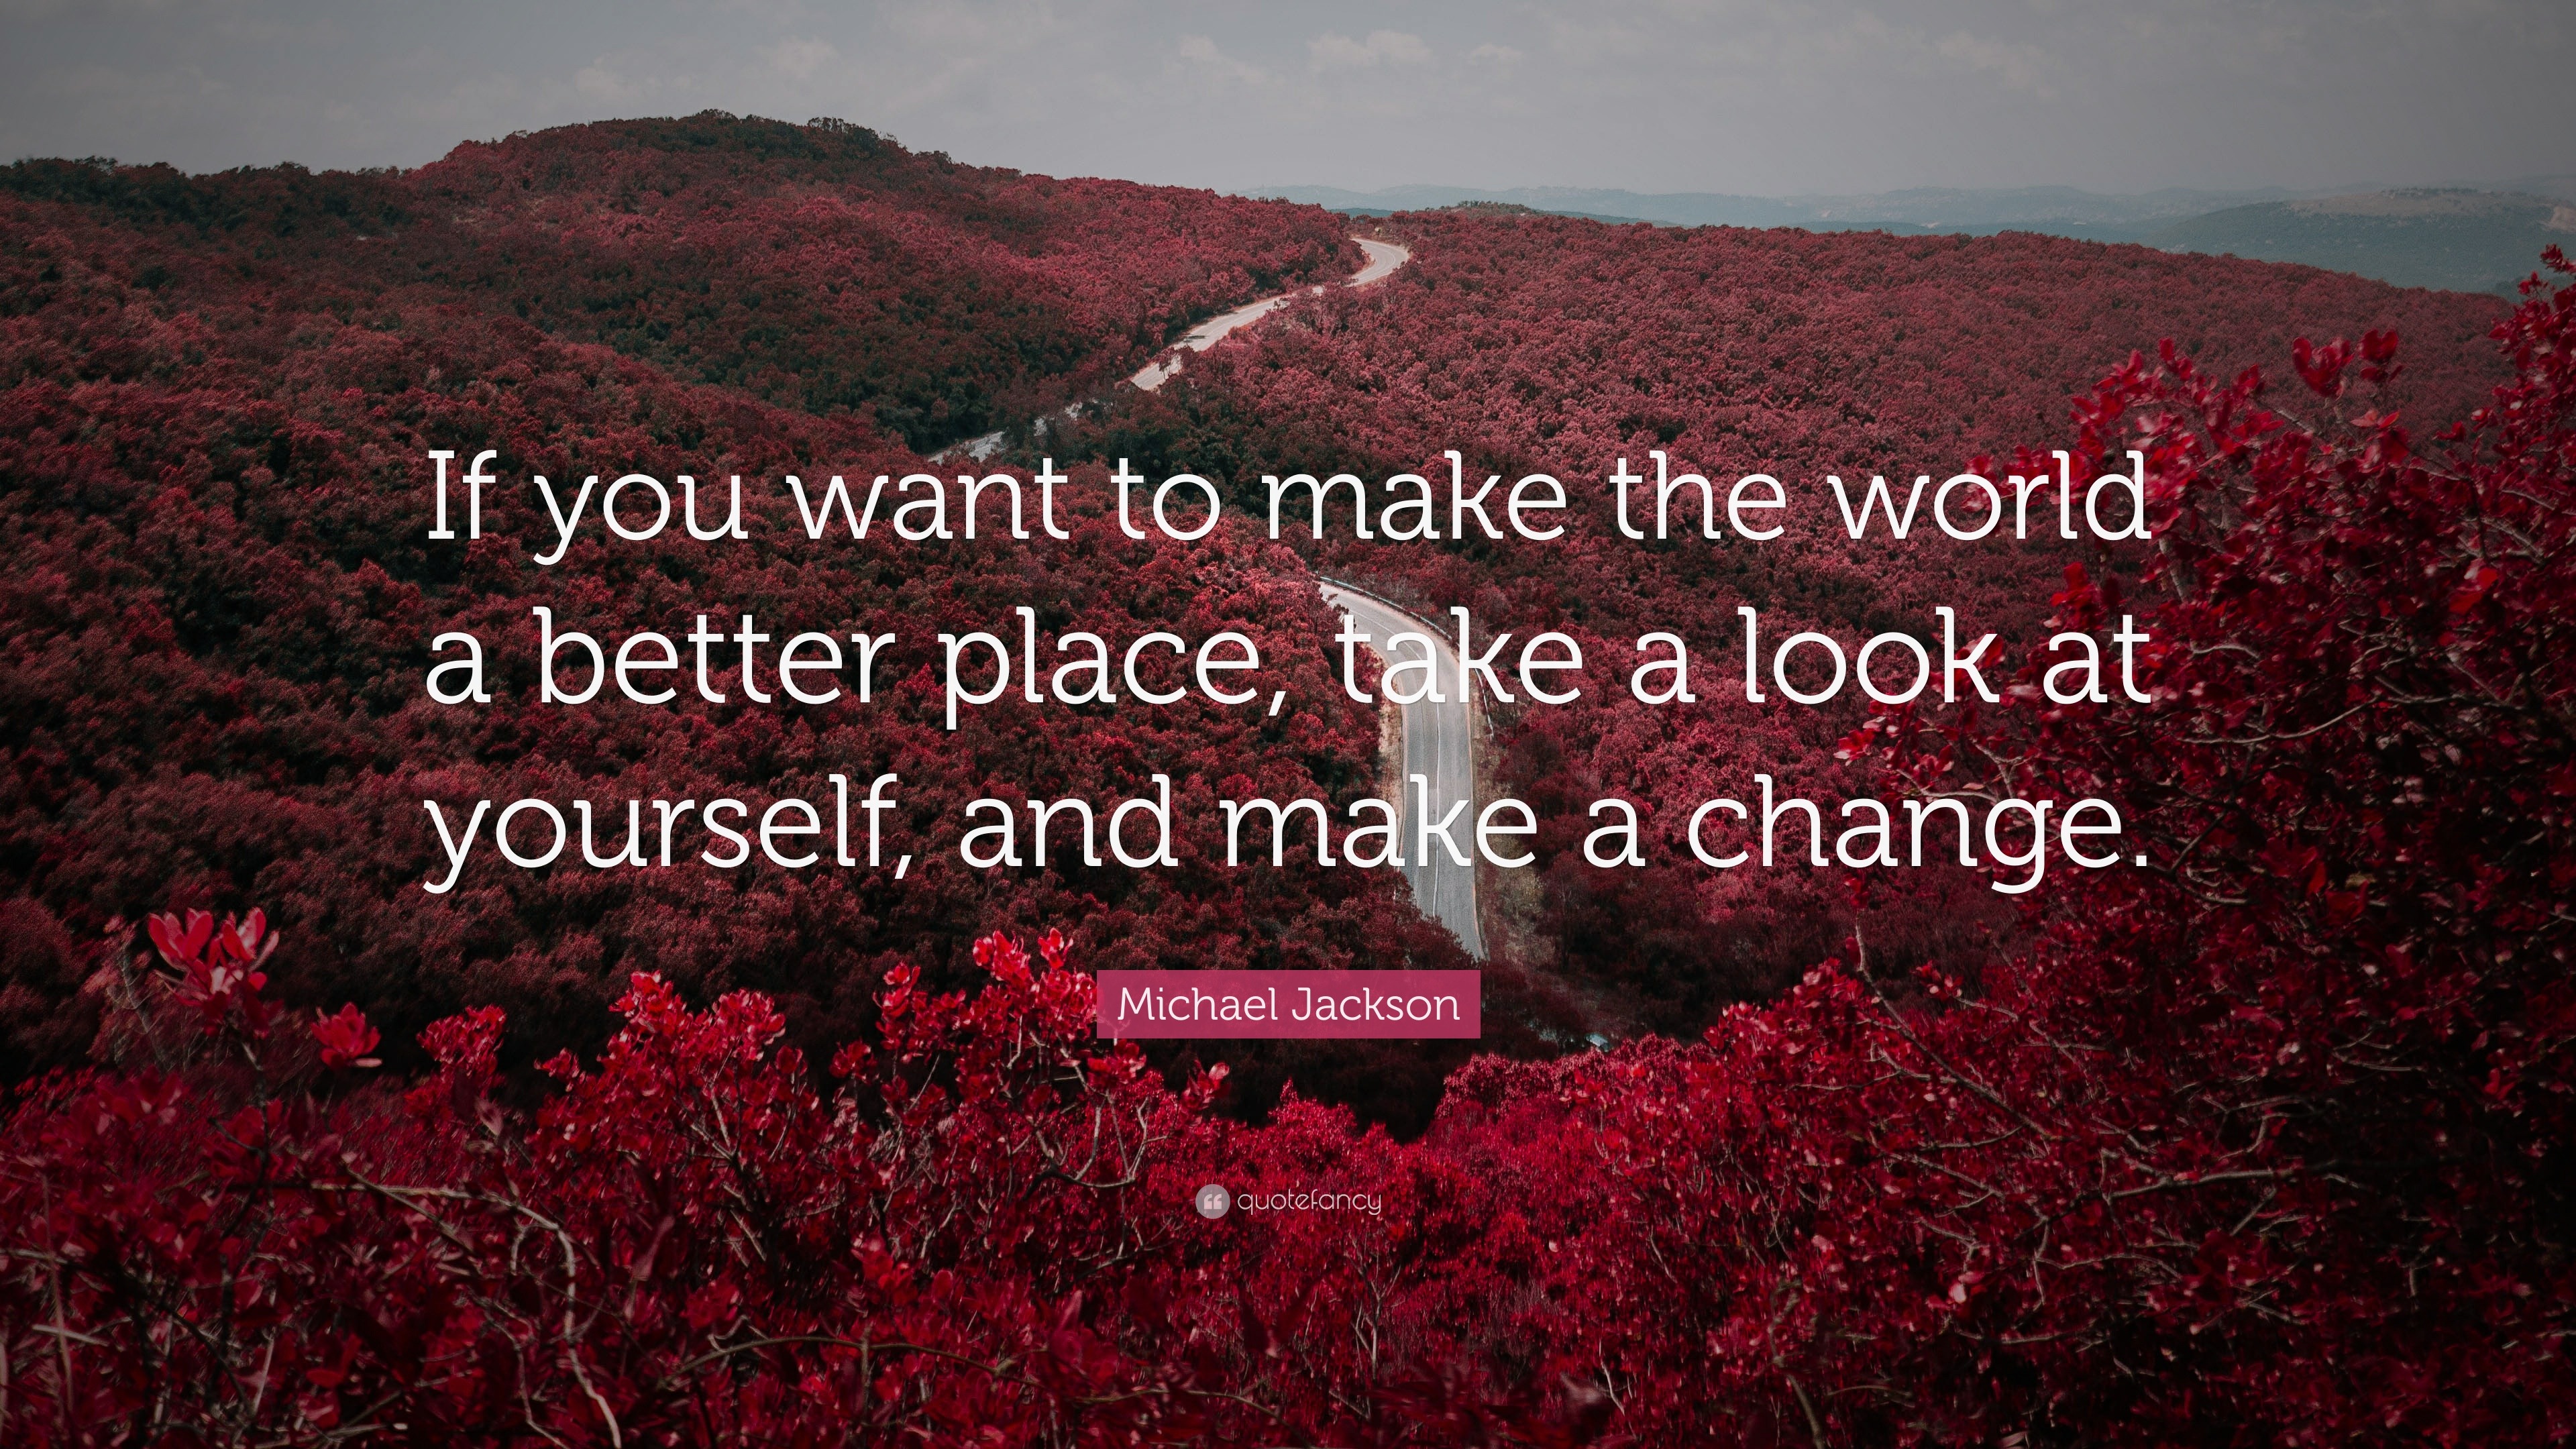 Michael Jackson Quote “If you want to make the world a better place